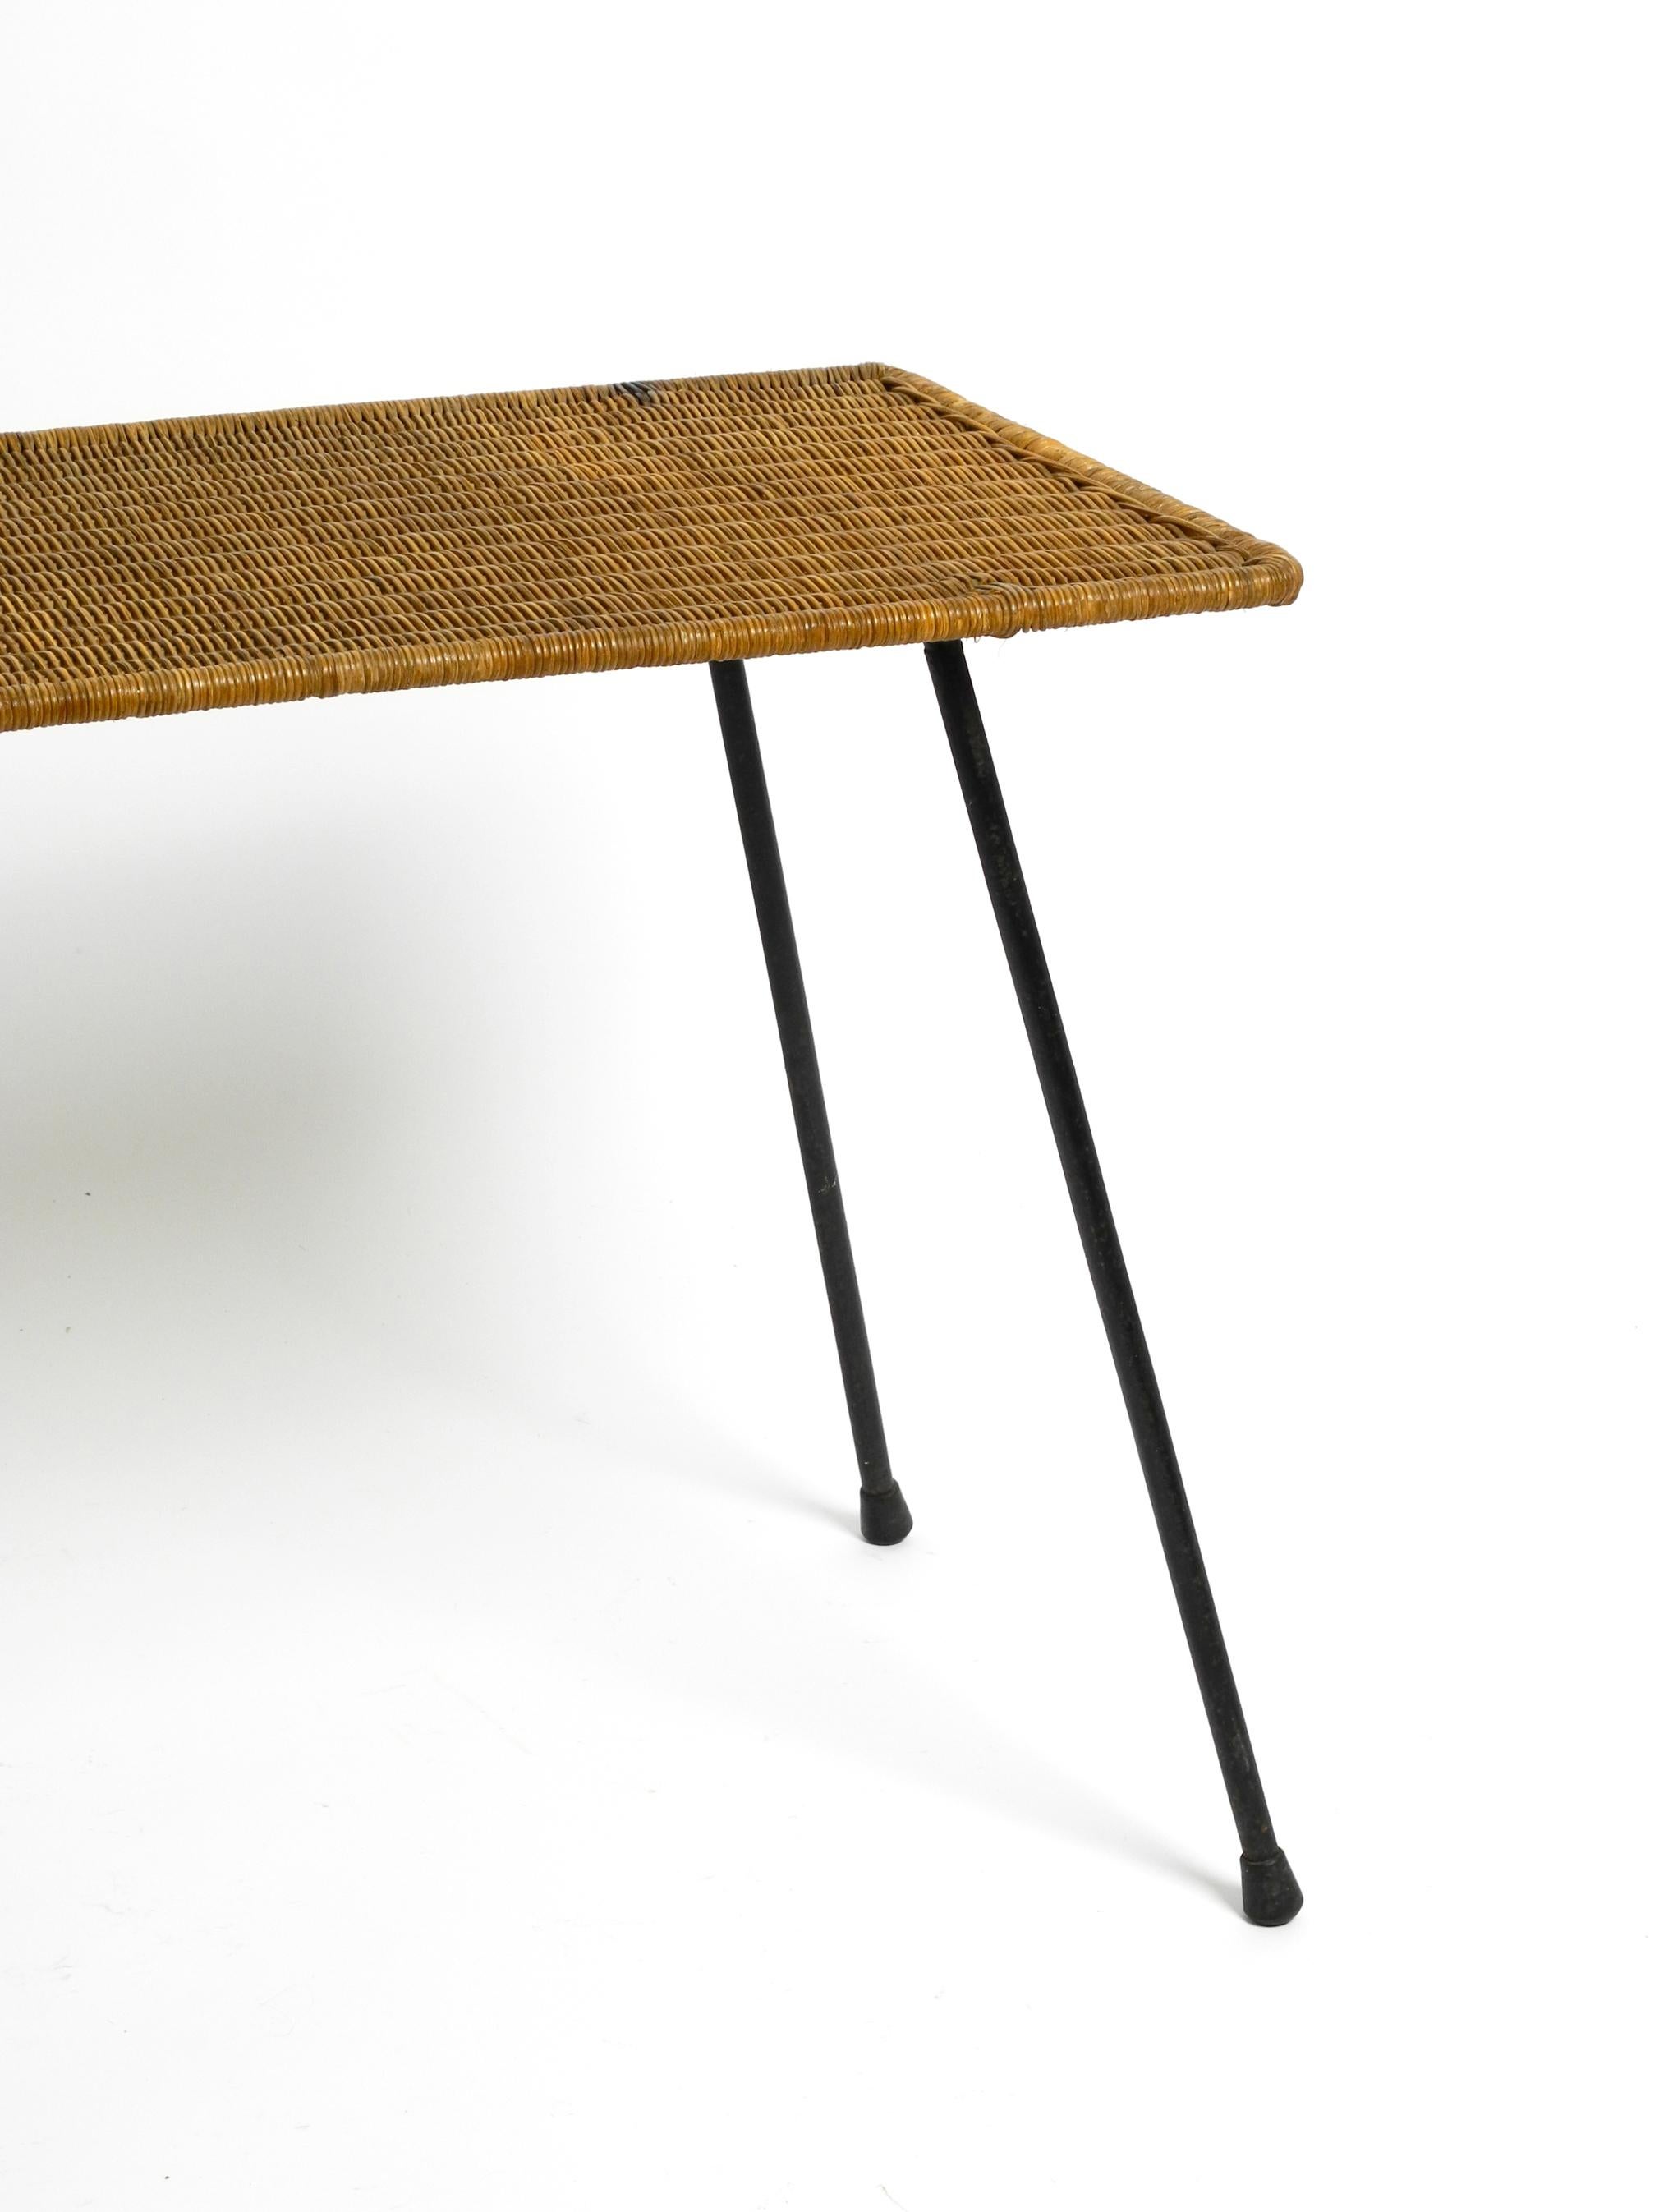 Italian Mid-Century Modern Rattan Side or Coffee Table with a Heavy Iron Frame For Sale 12